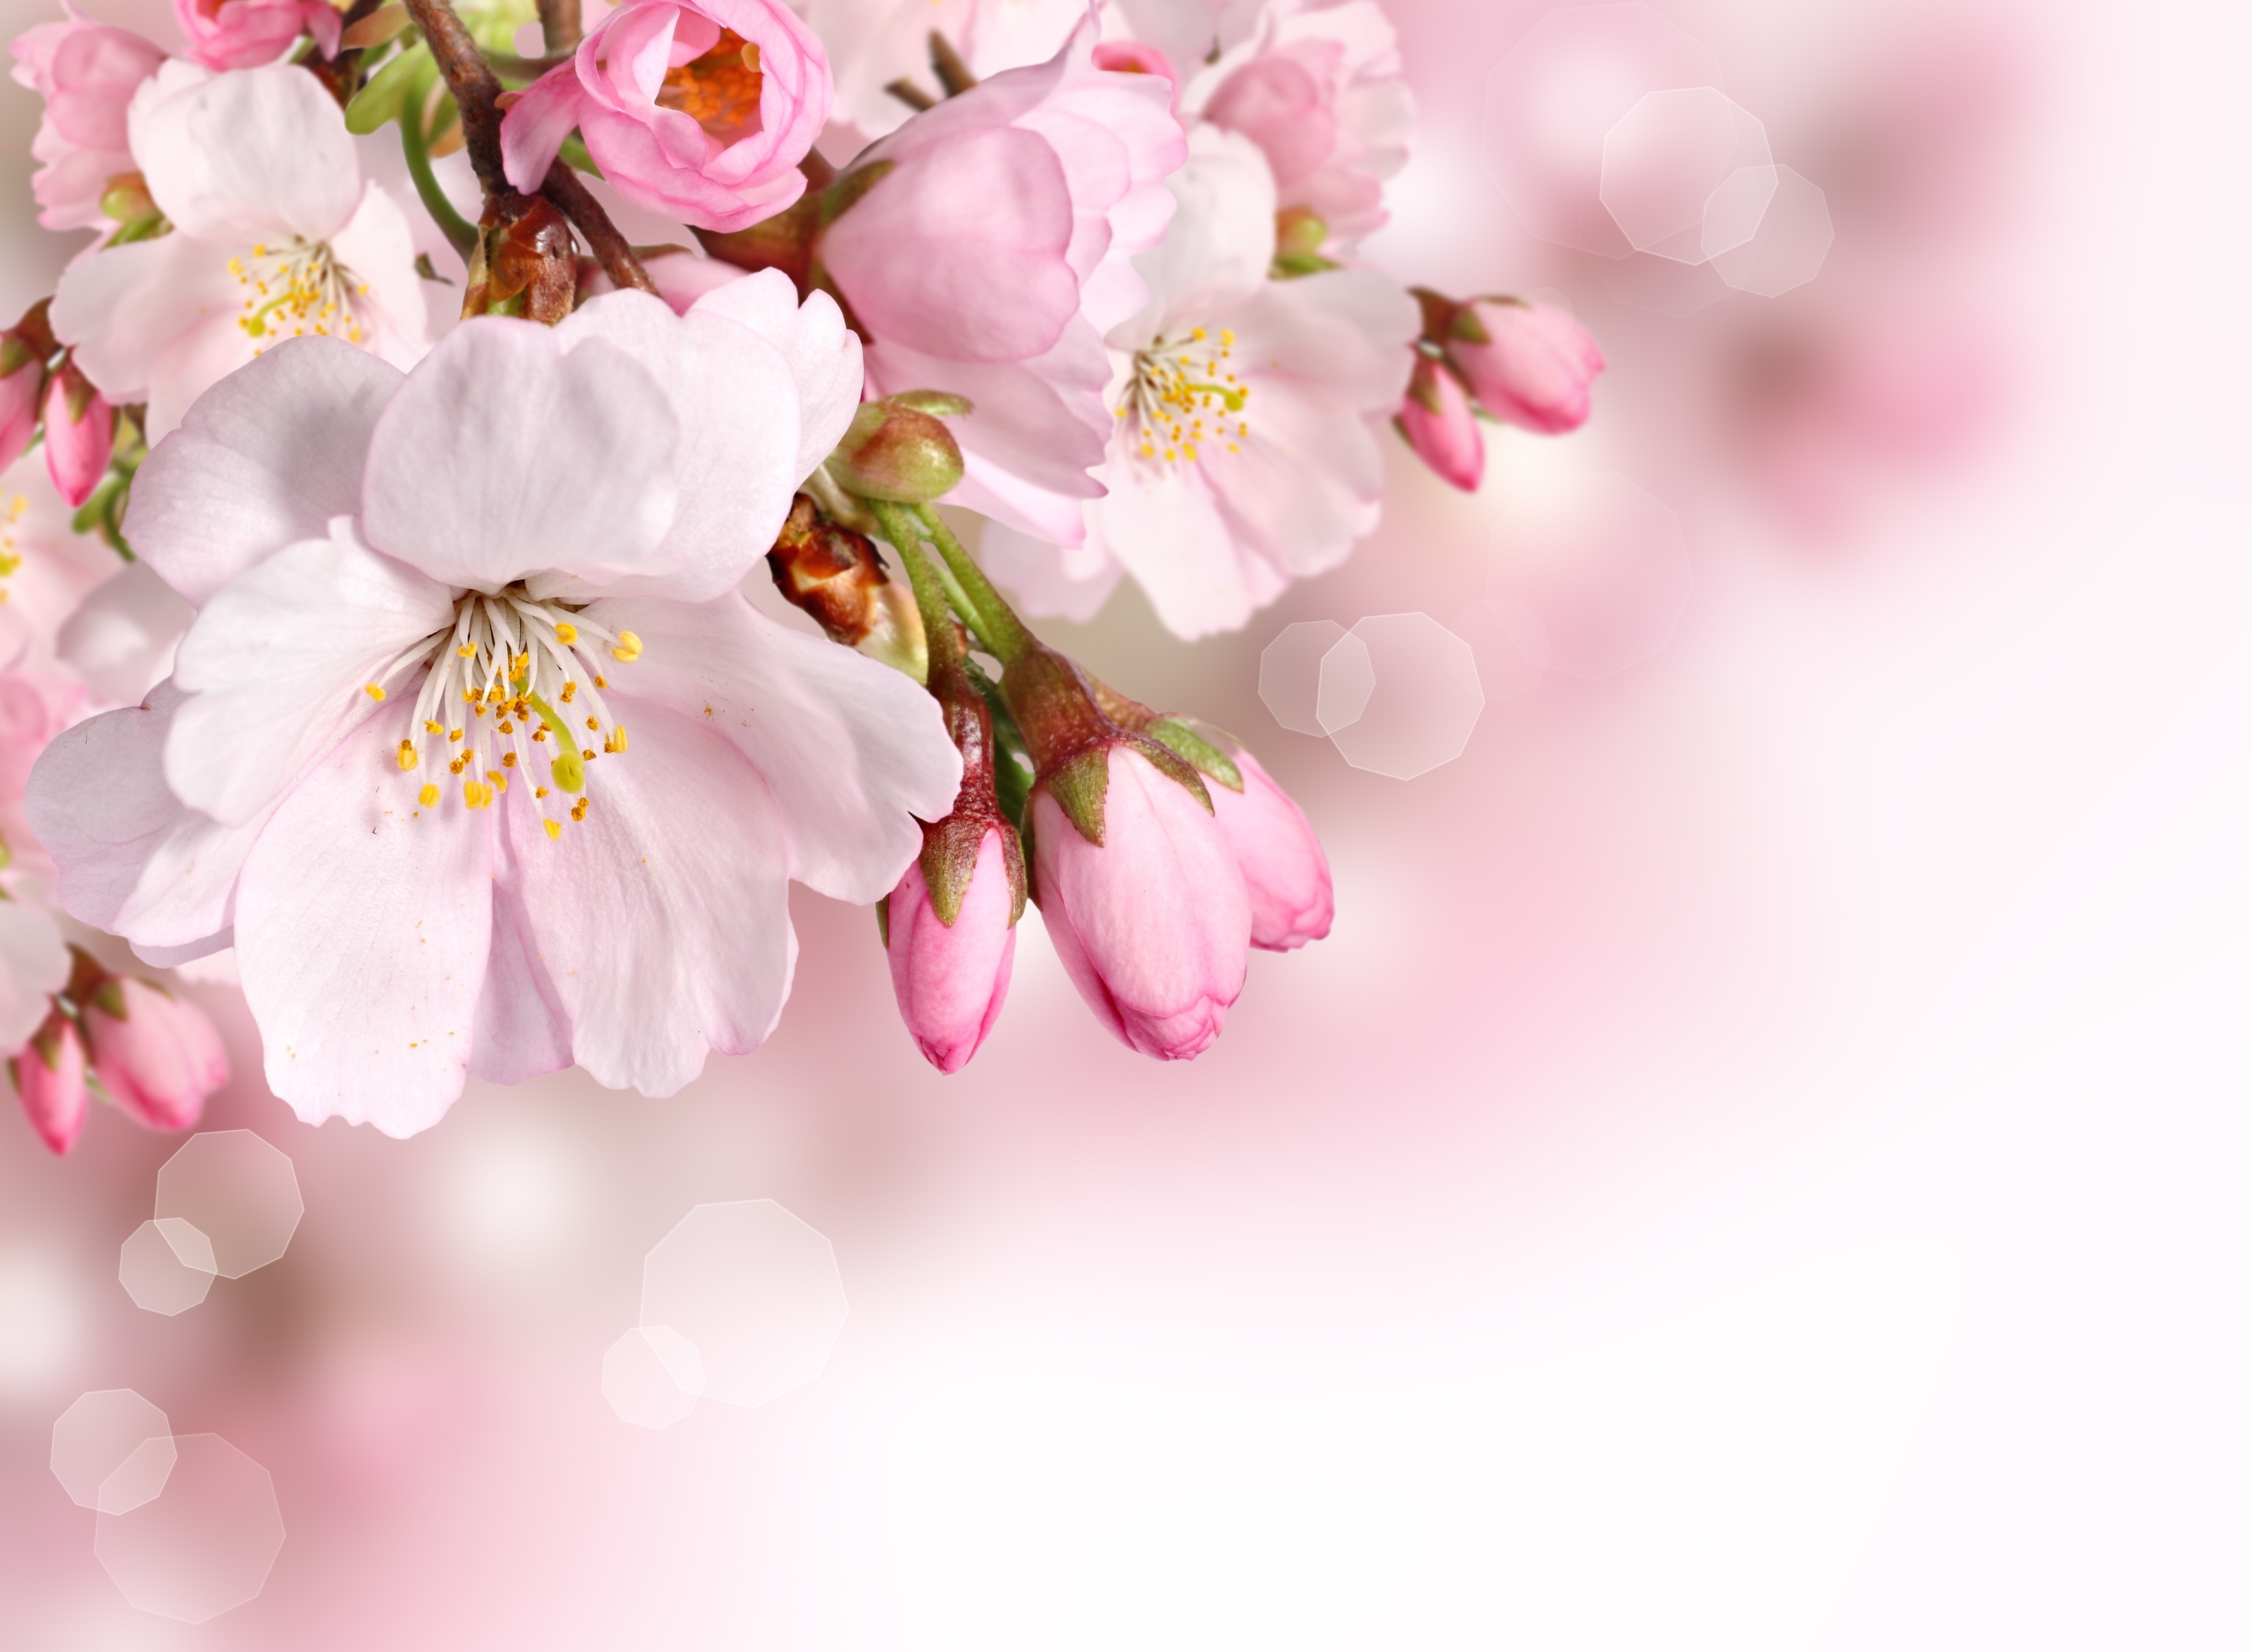 earth, blossom, close up, flower, nature, pink flower, spring, flowers